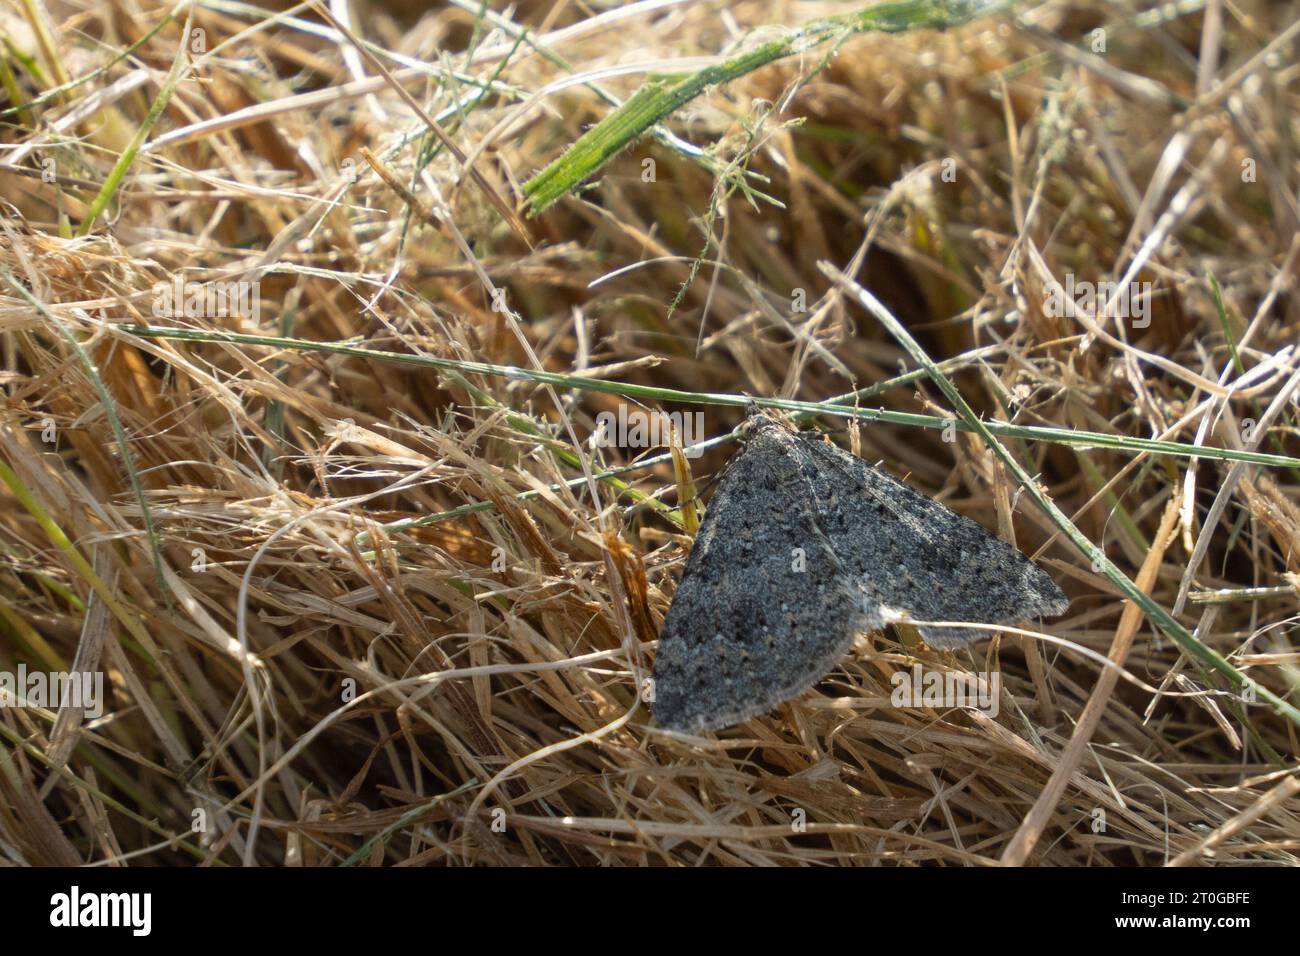 Helastia corcularia, a grey carpet moth endemic to New Zealand, in grass clippings in garden. Stock Photo